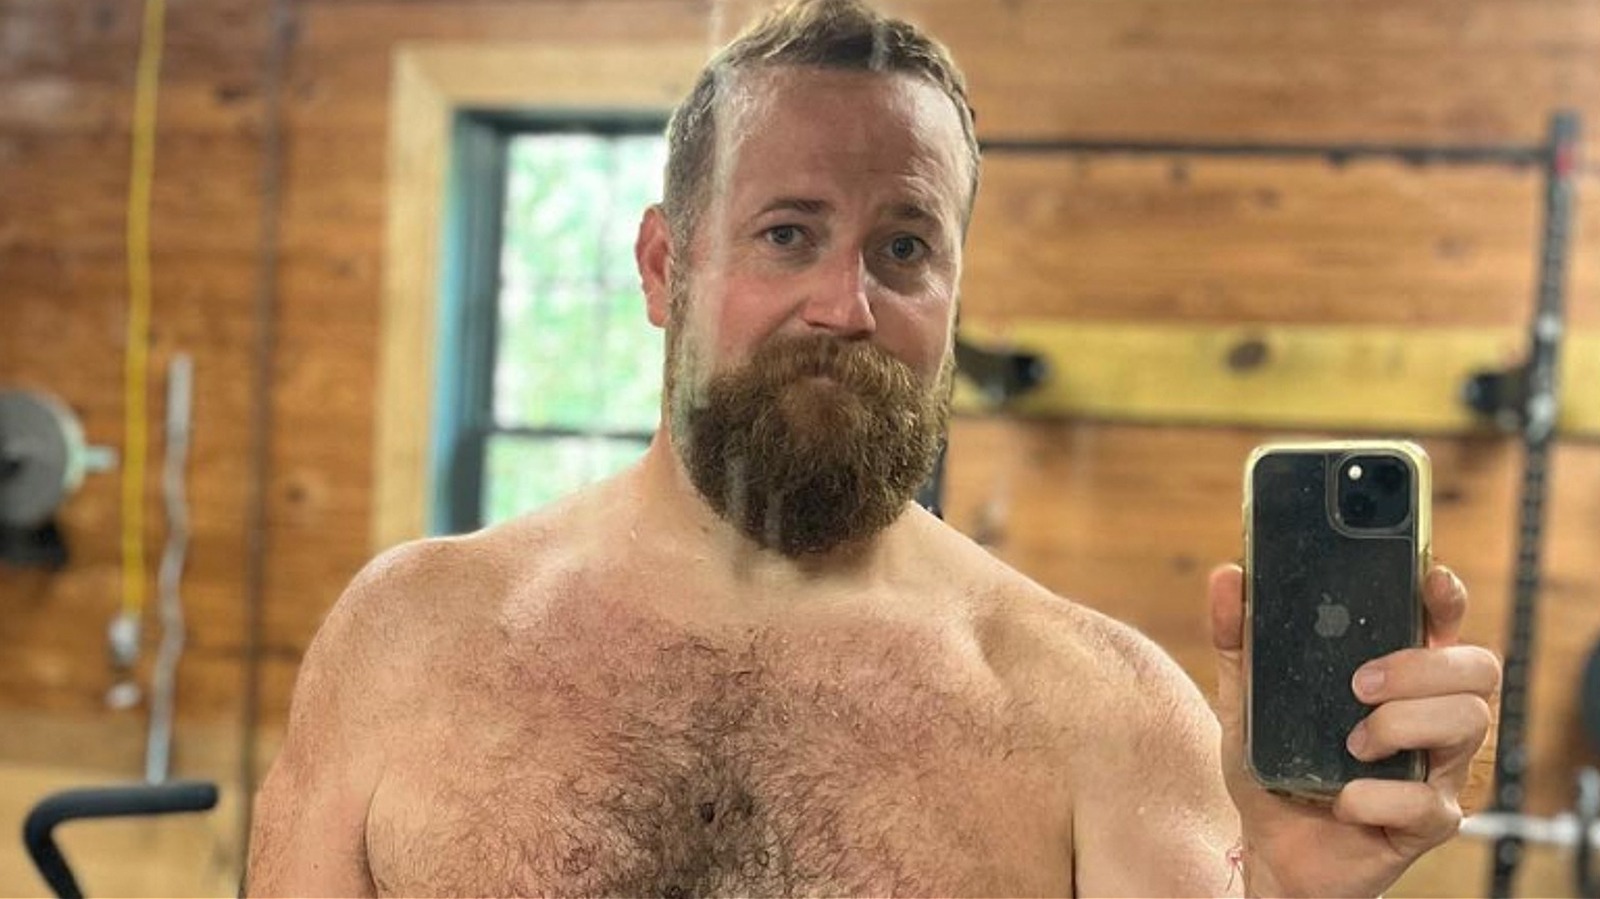 Erin Napiers Shirtless Photo Of Her Husband Ben Proves Hes Hotter Than Ever At 40 